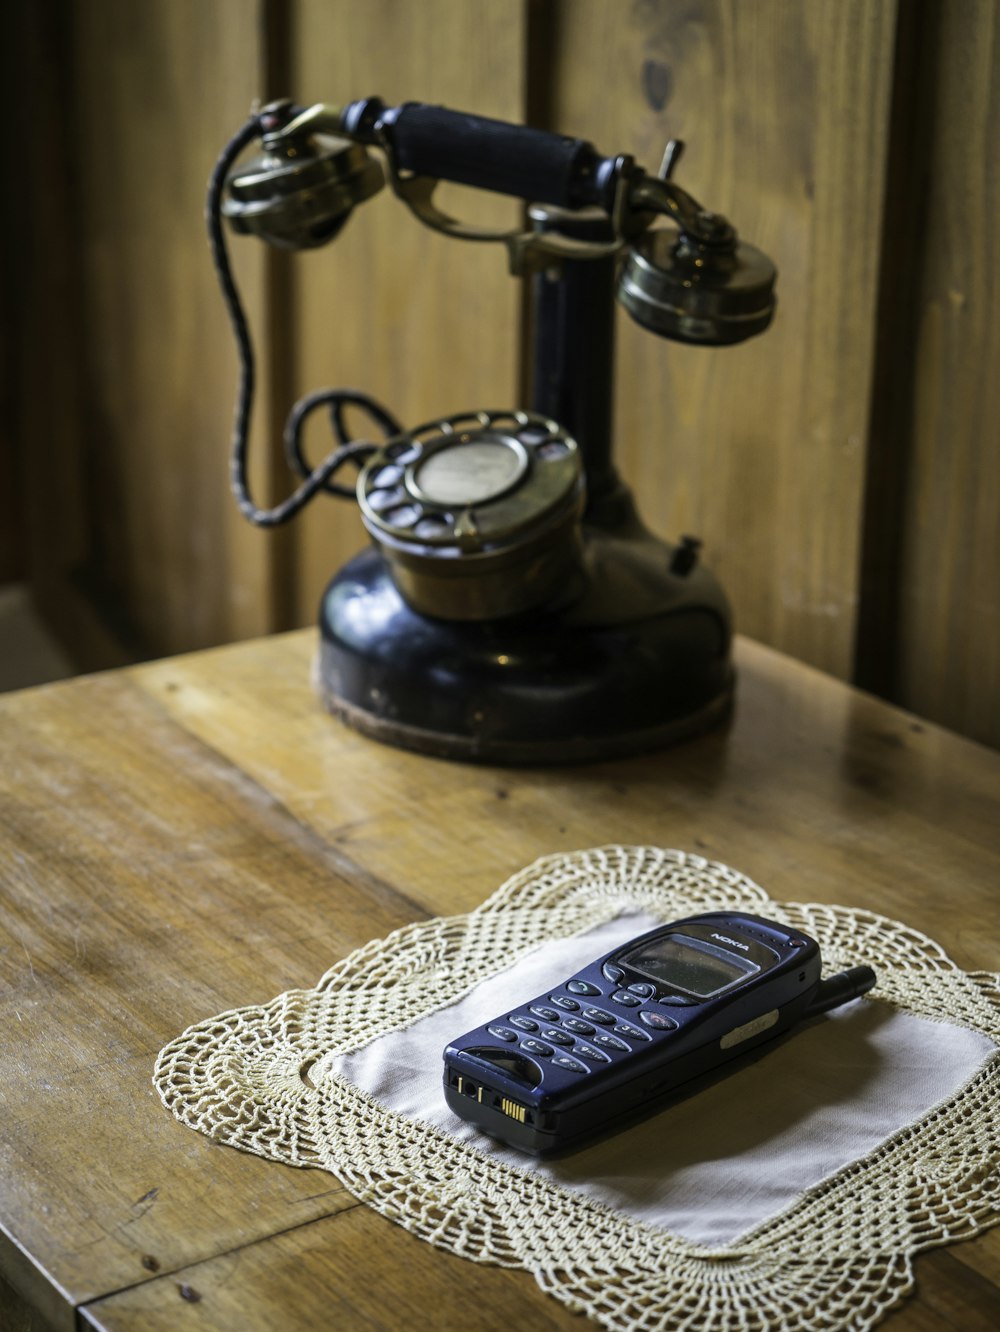 black and silver desk phone on white knit table mat